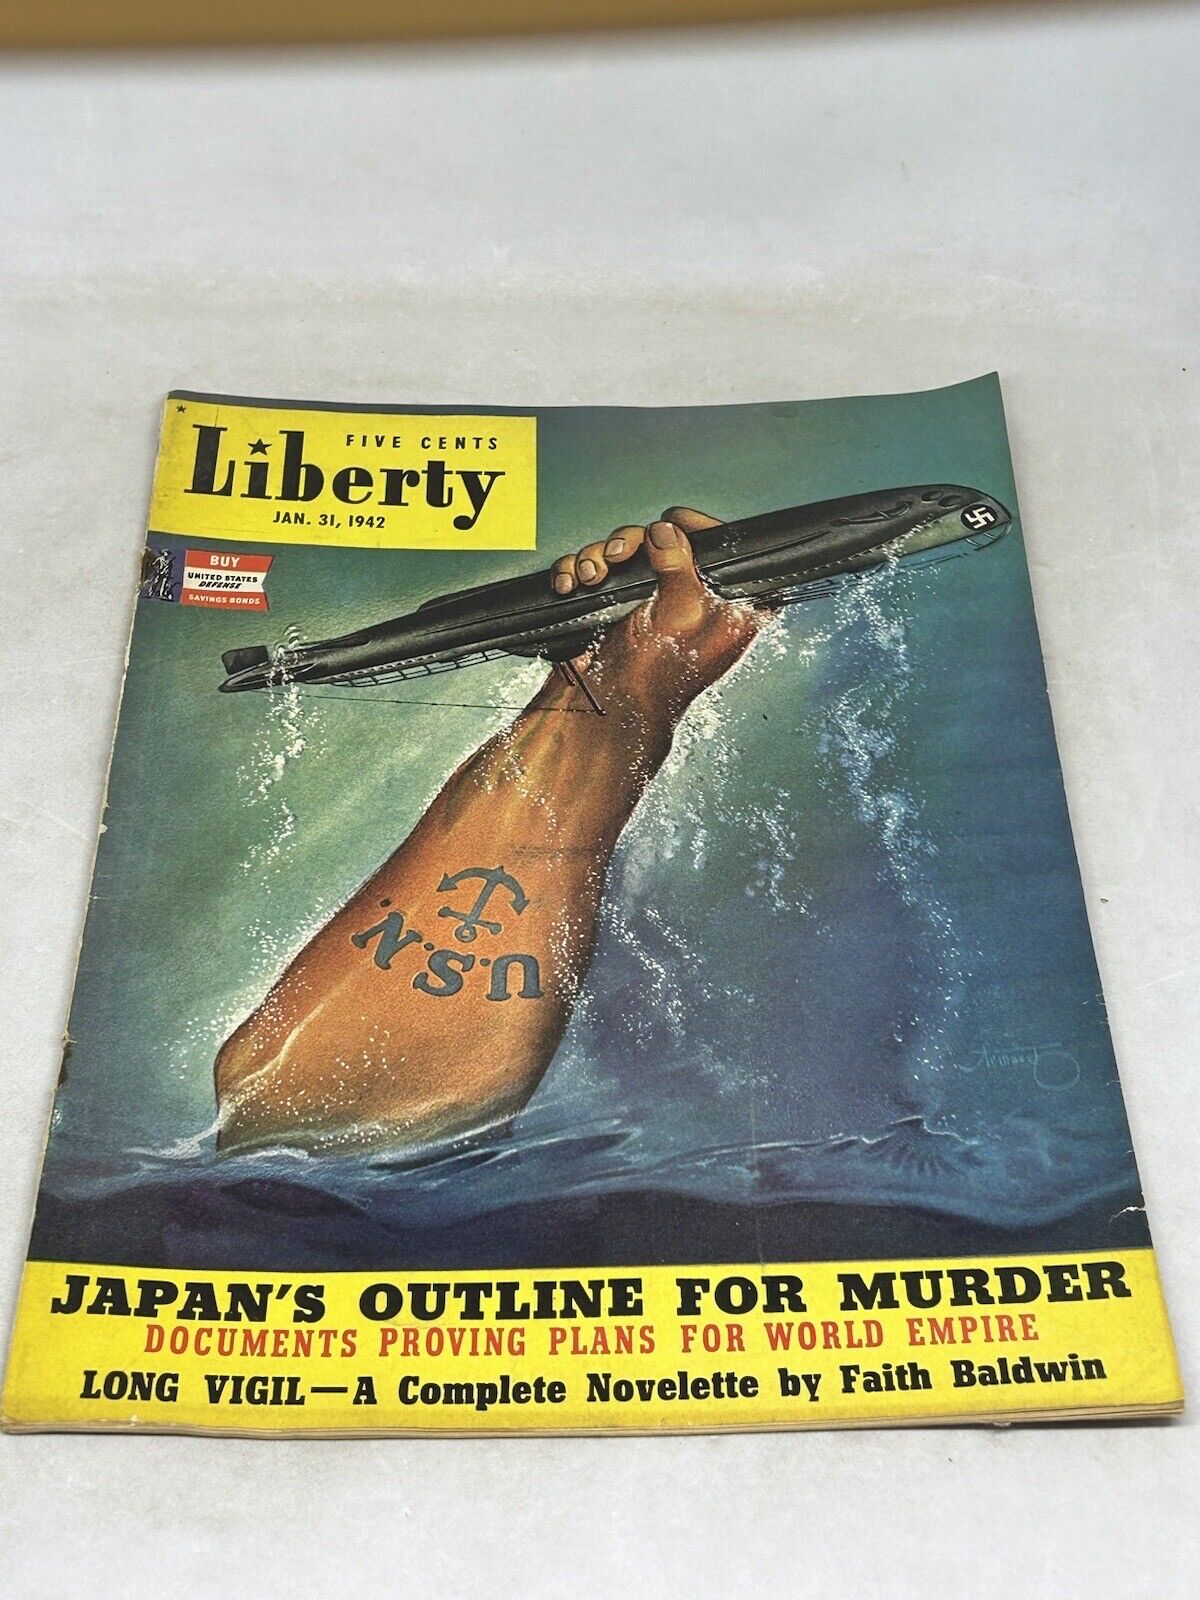 1942 JANUARY 31 LIBERTY MAGAZINE - JAPAN'S OUTLINE FOR MURDER - Wartime WWII